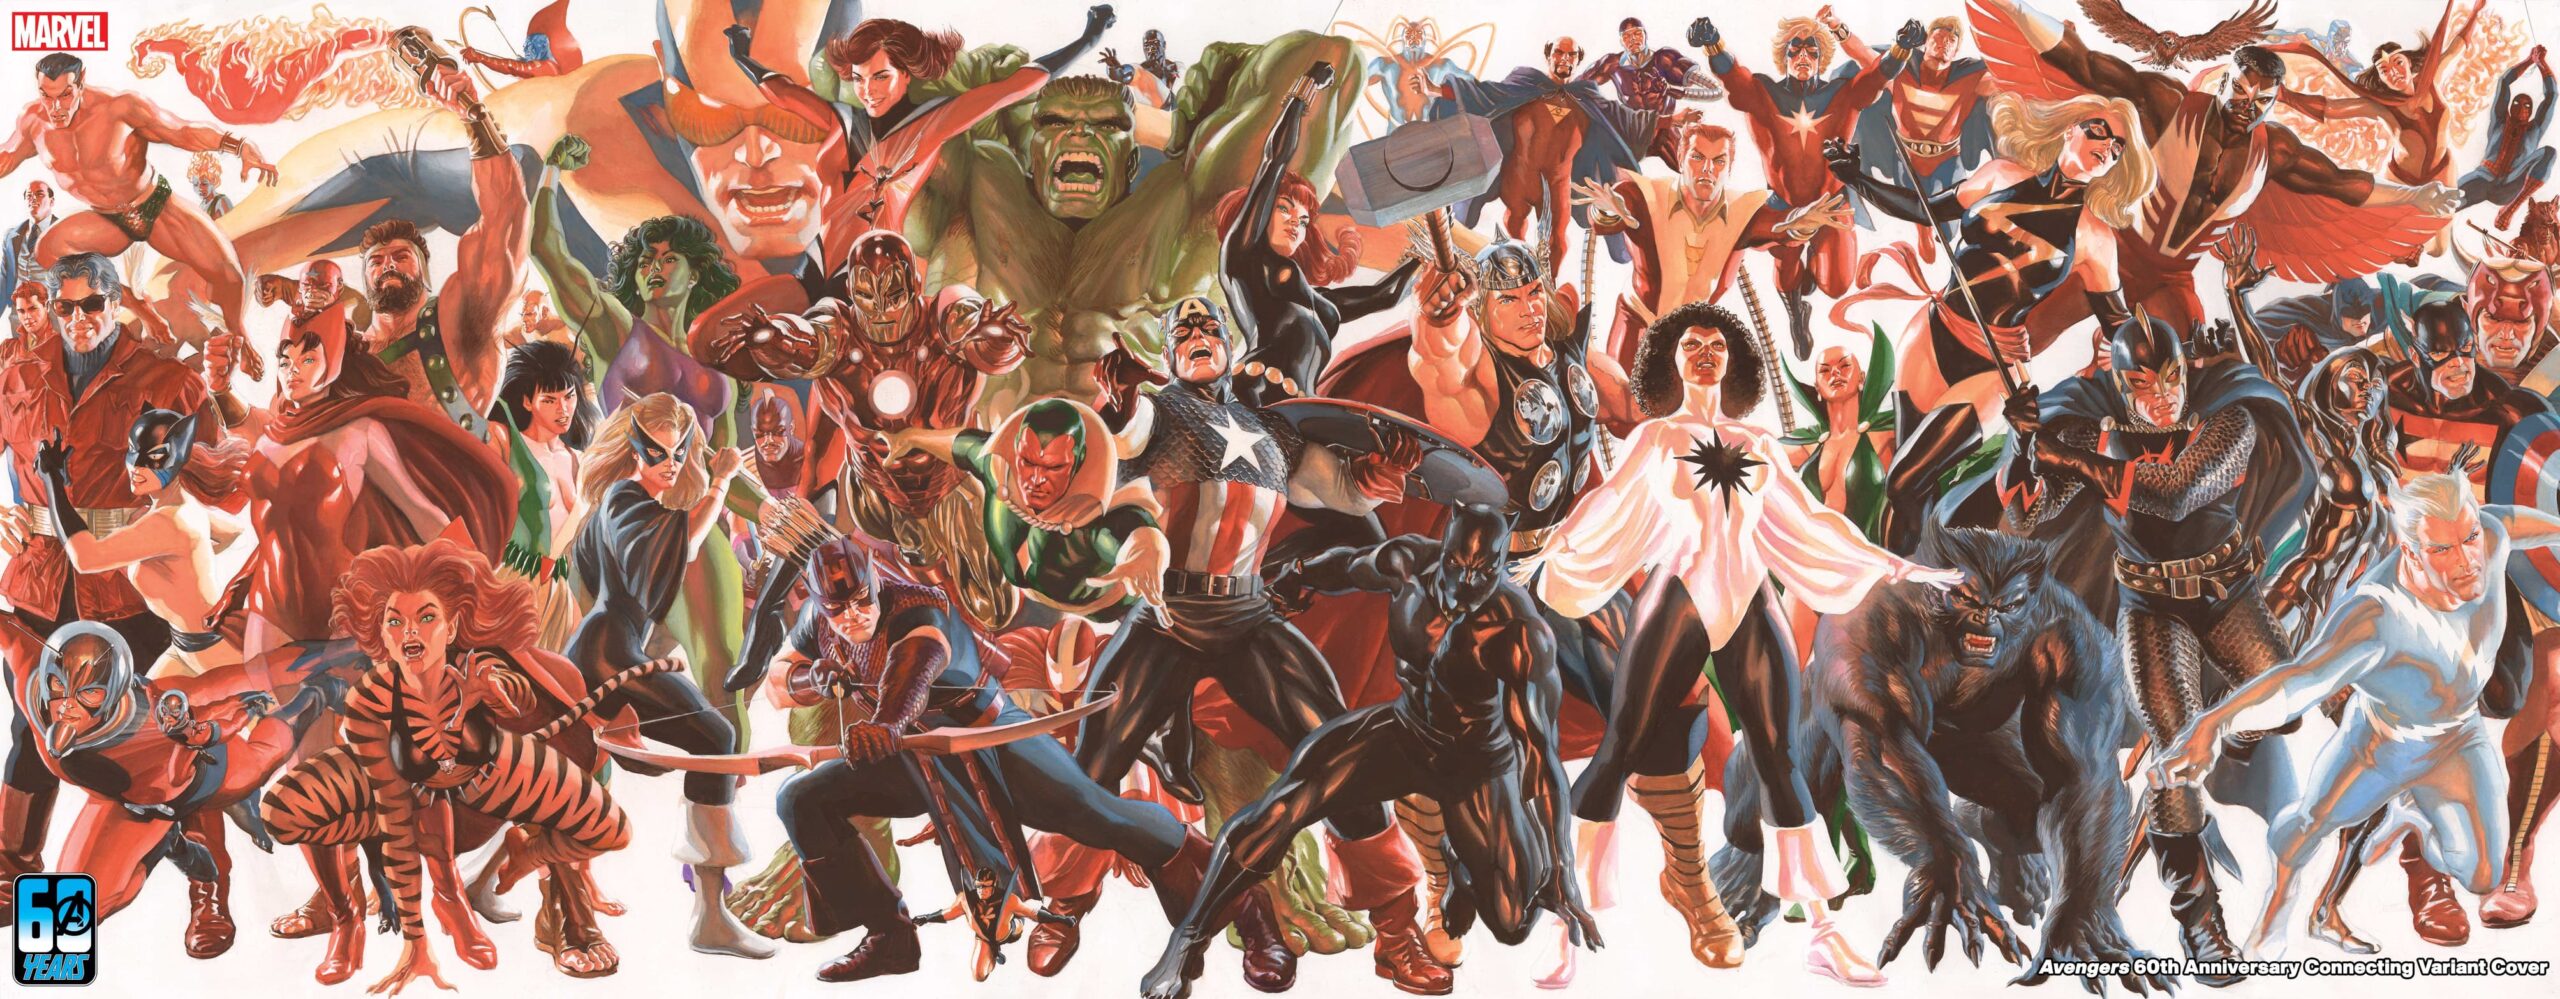 Alex Ross AVENGERS & X-MEN 60th Anniversary Connecting Cover Set